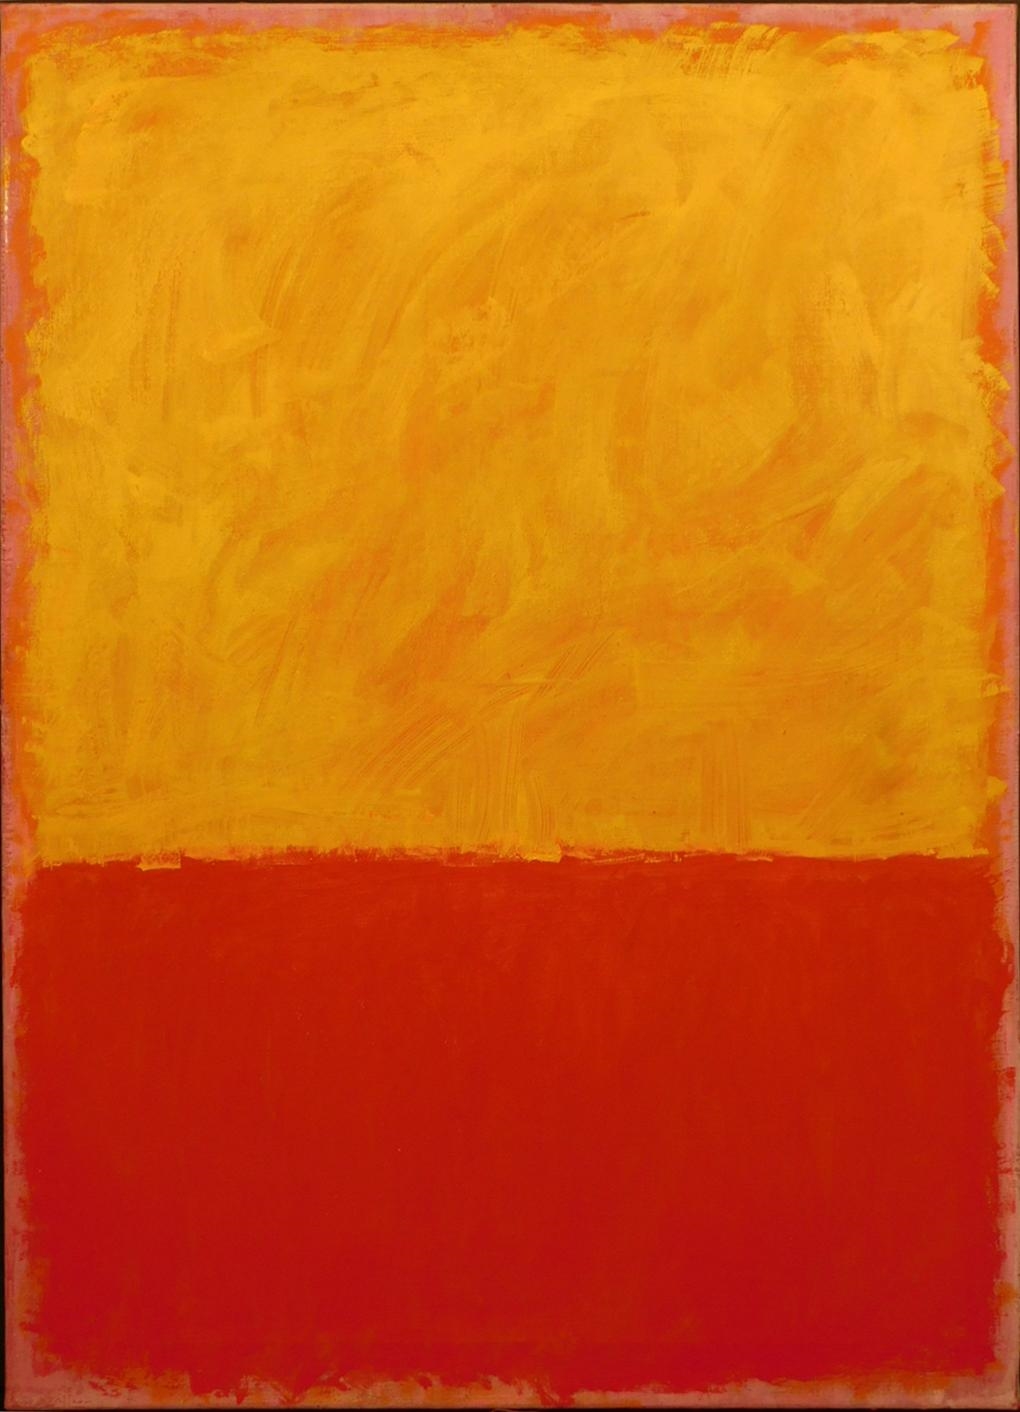 Color Field Painting - Red and Yellow by Mark Rothko, 1968